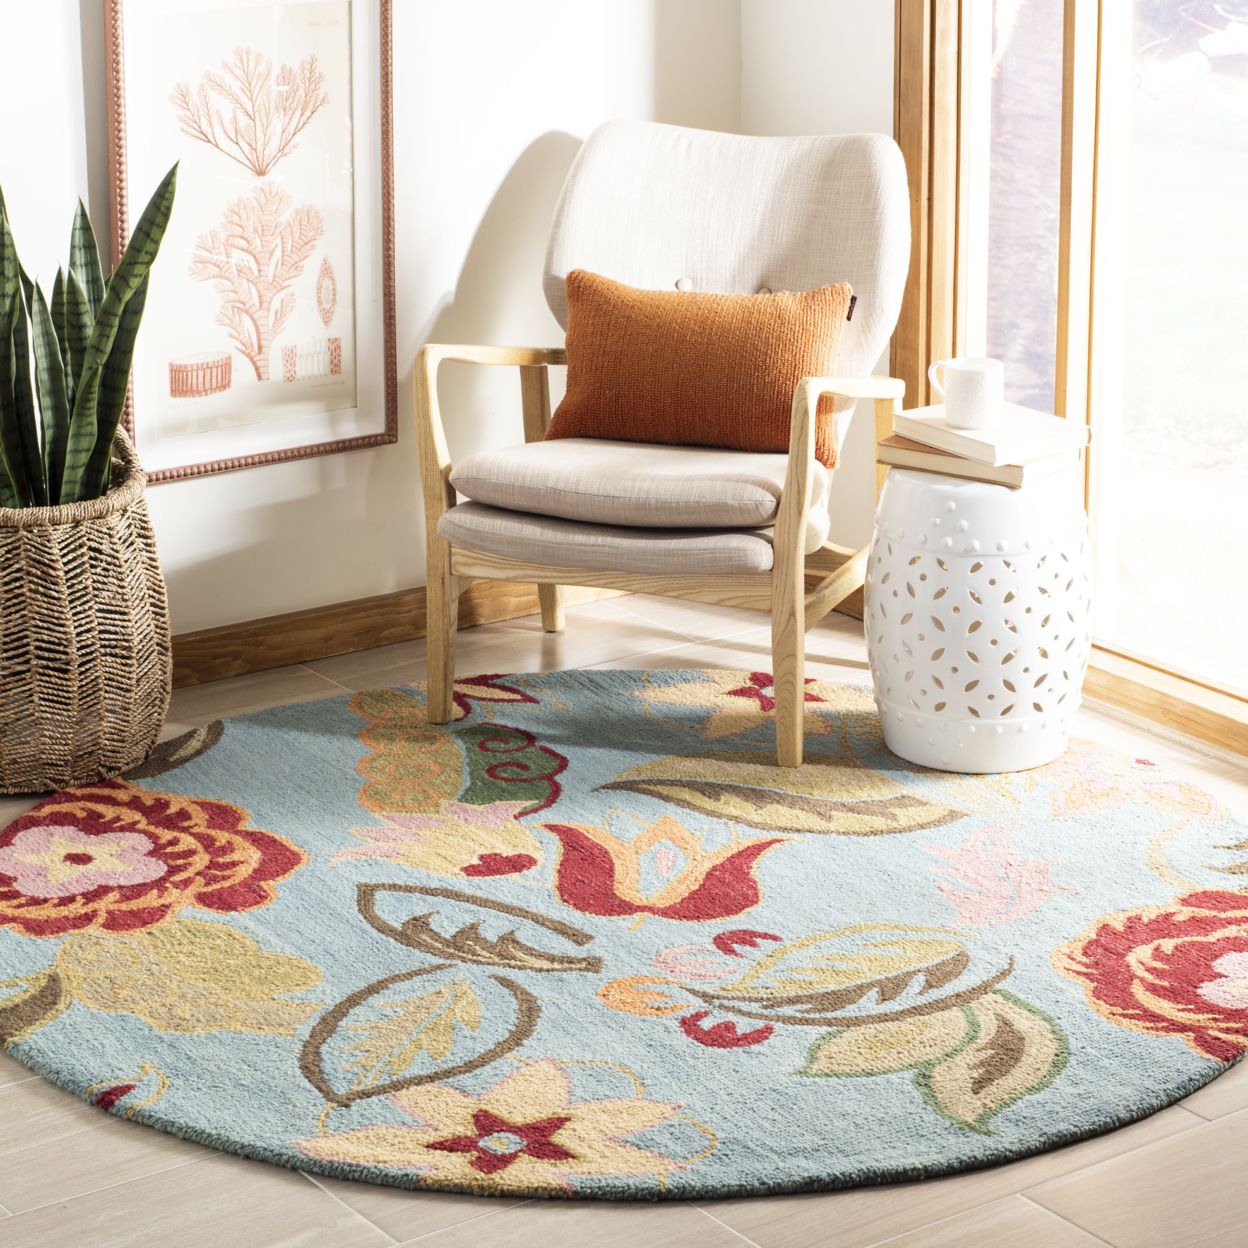 SAFAVIEH Blossom BLM675A Hand-hooked Blue / Multi Rug - 6' Square